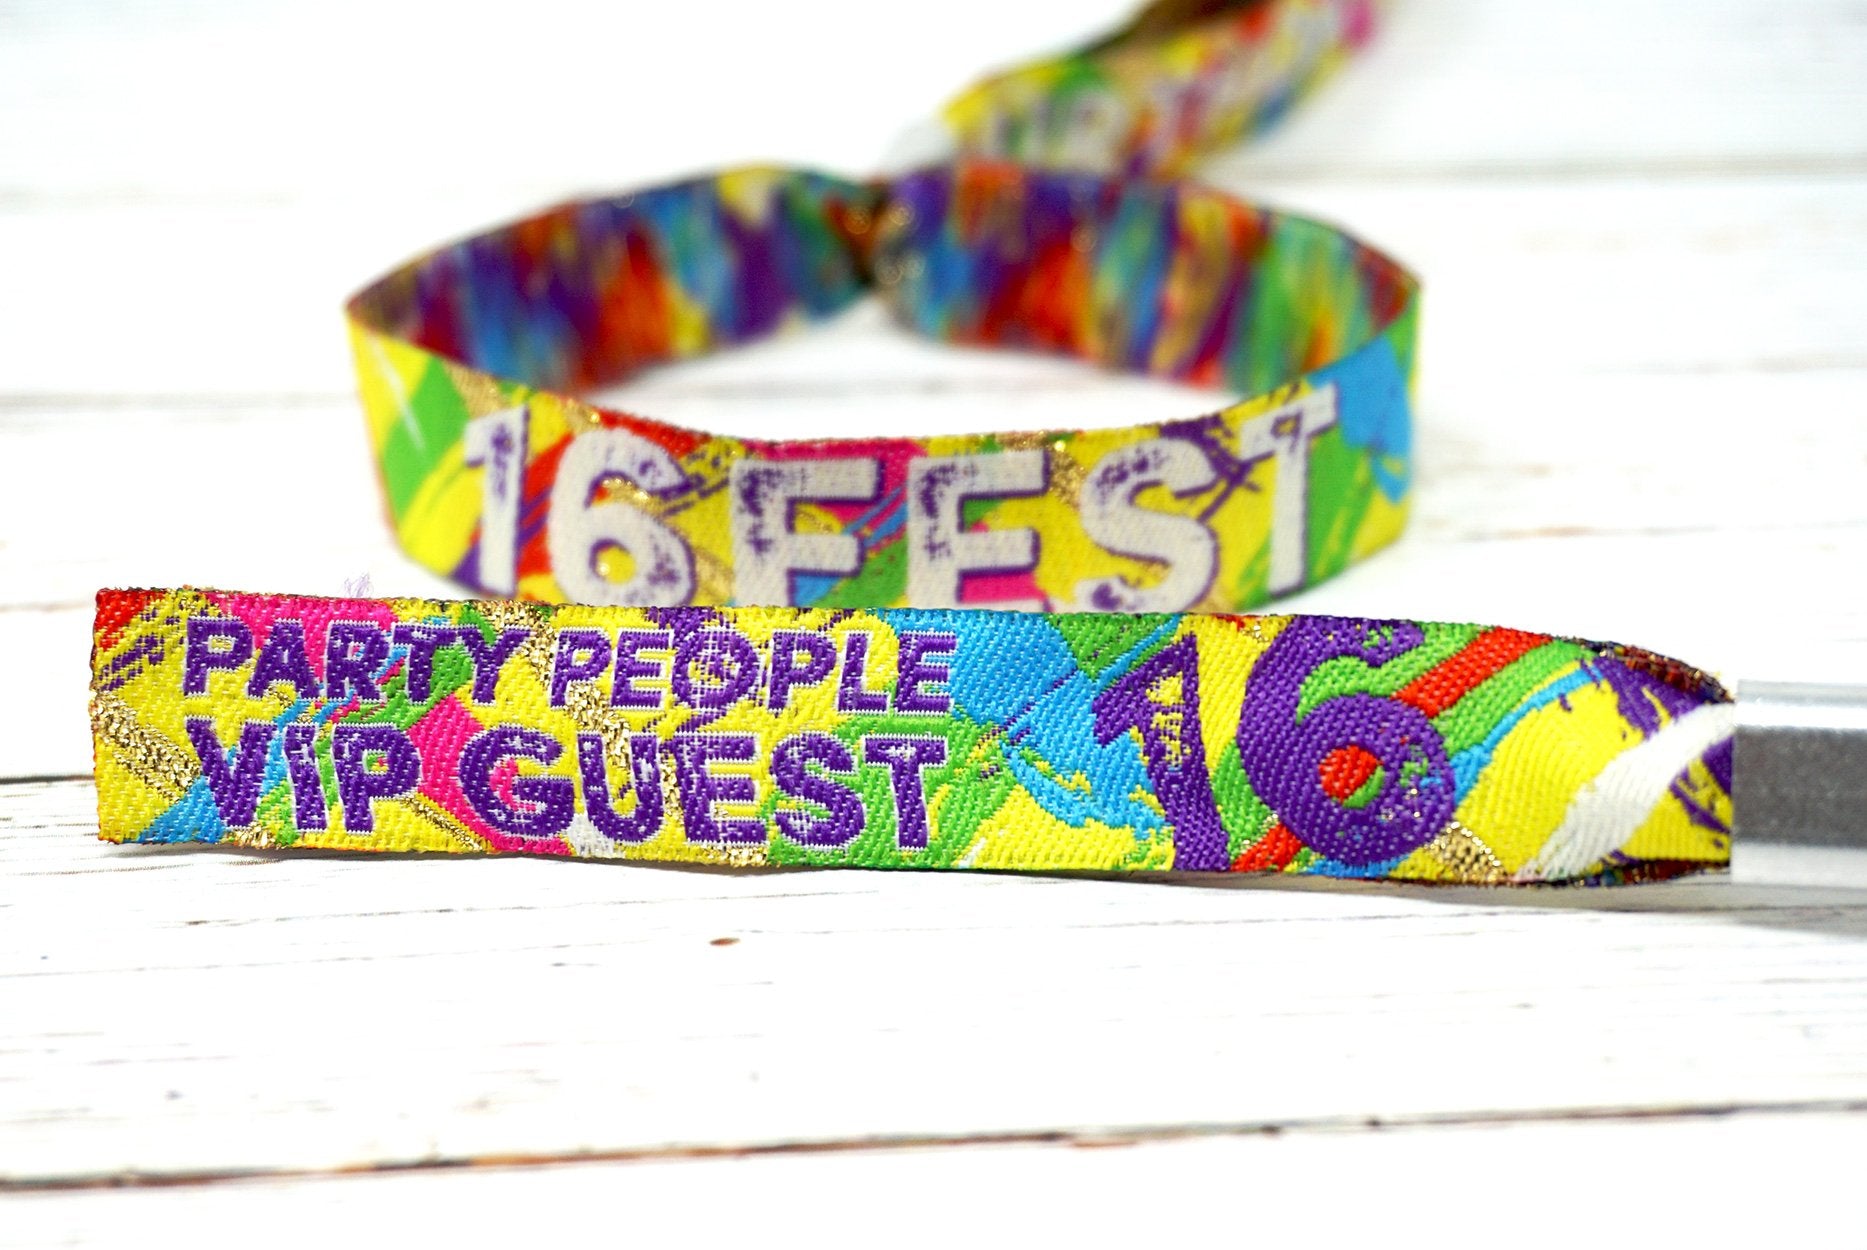 16 FEST 16th birthday party festival wristbands favours accessories